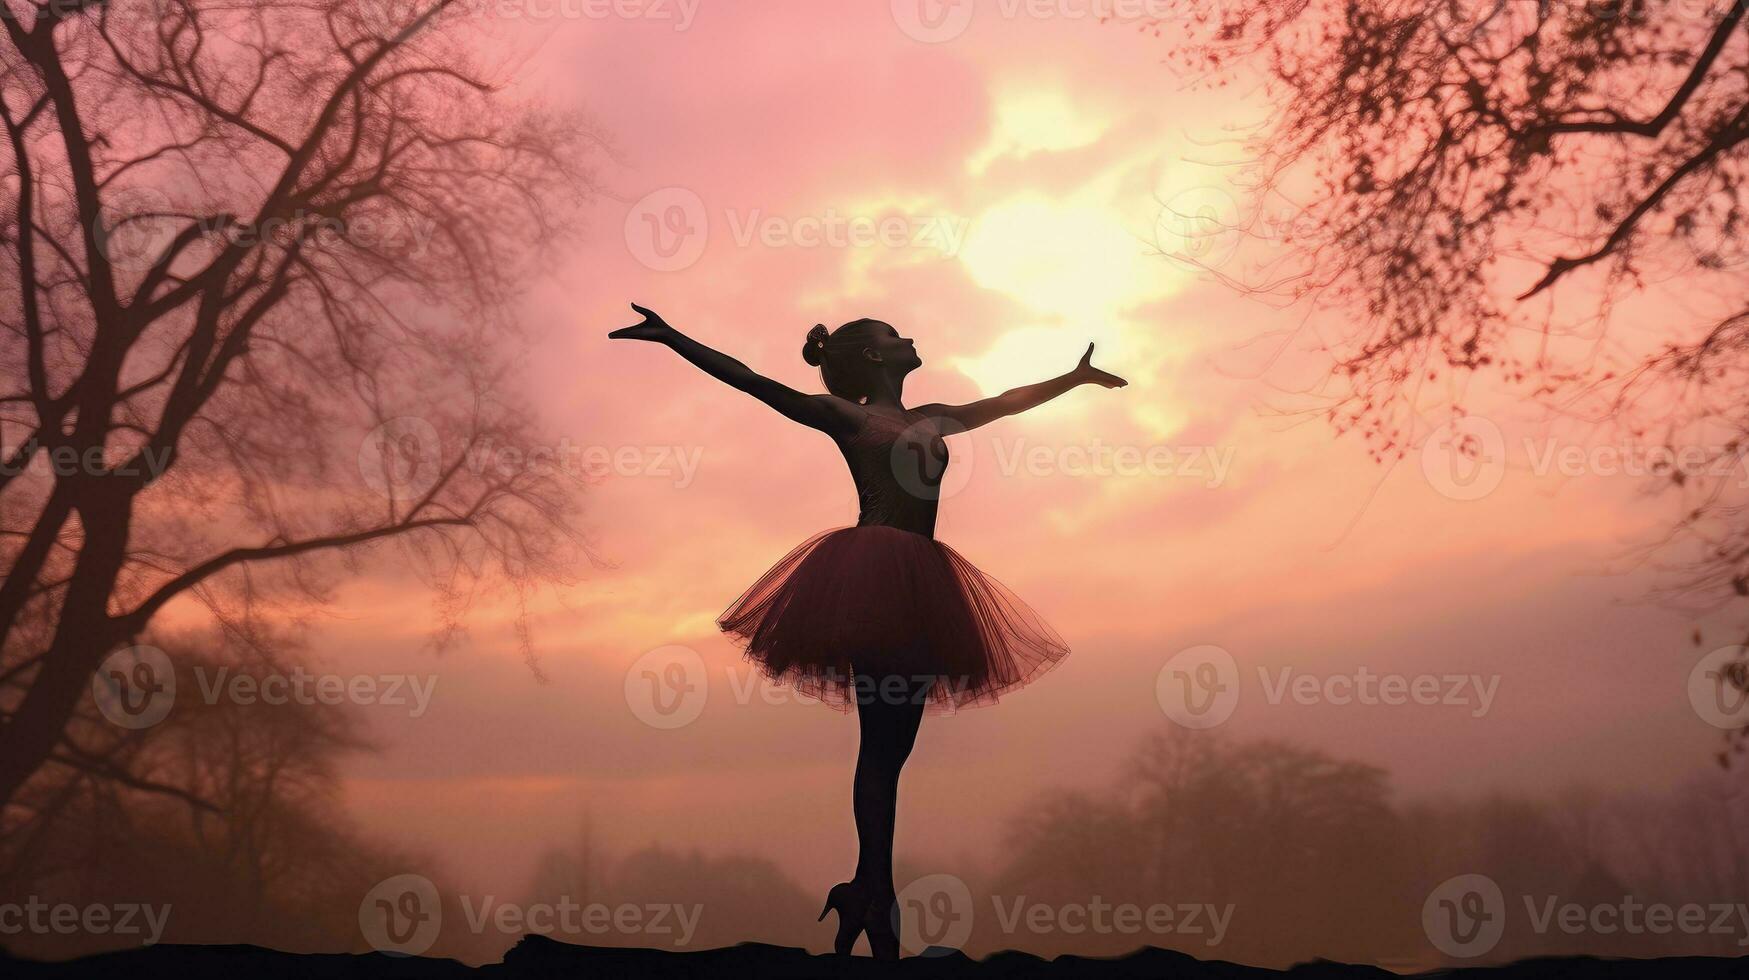 Ballerina dancing on tiptoe outdoors with pink clouds and blurred trees in the background. silhouette concept photo